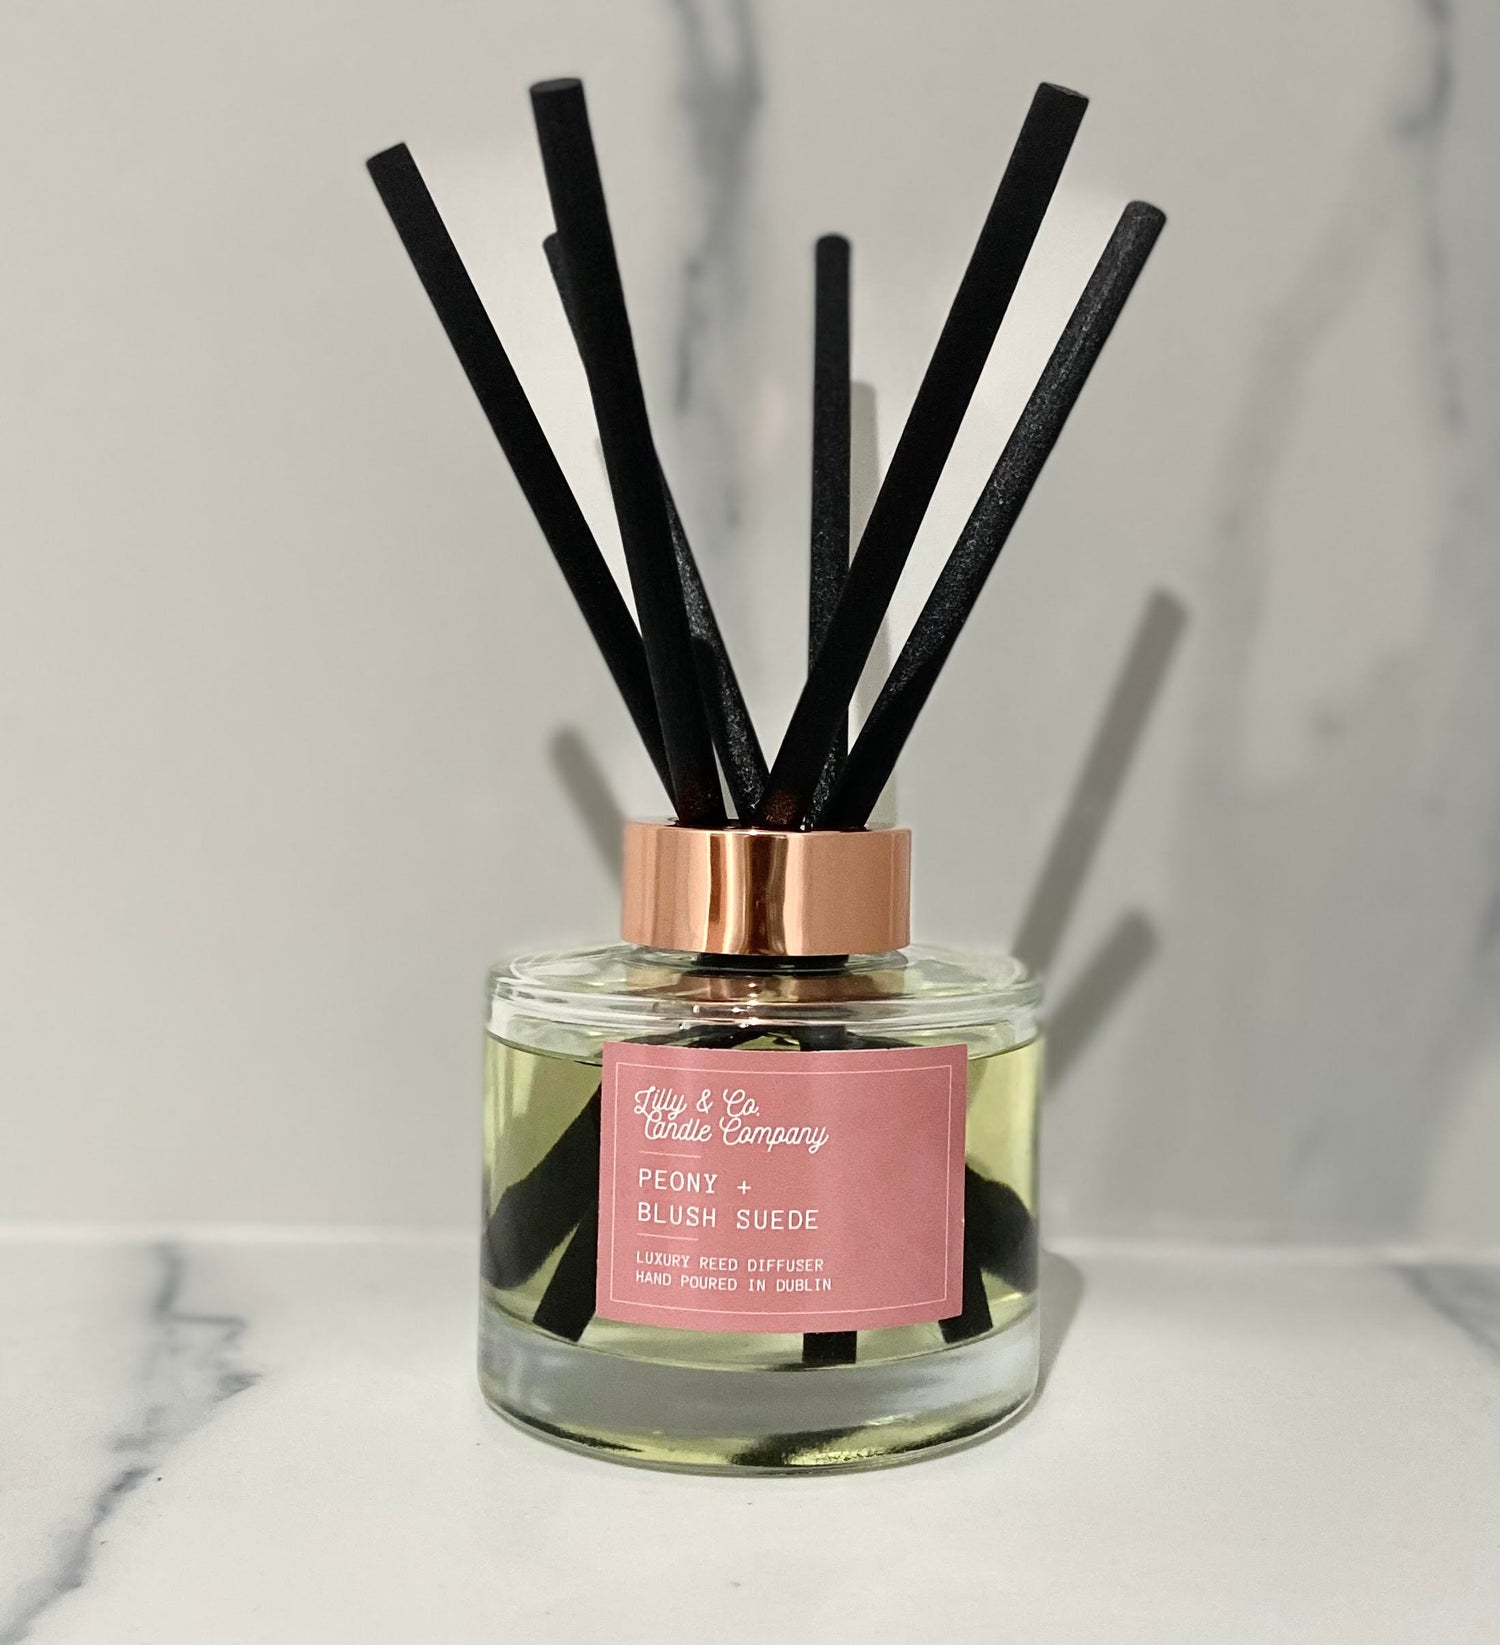 Peony + Blush Suede Luxury Diffuser – Lilly & Co. Candle Company